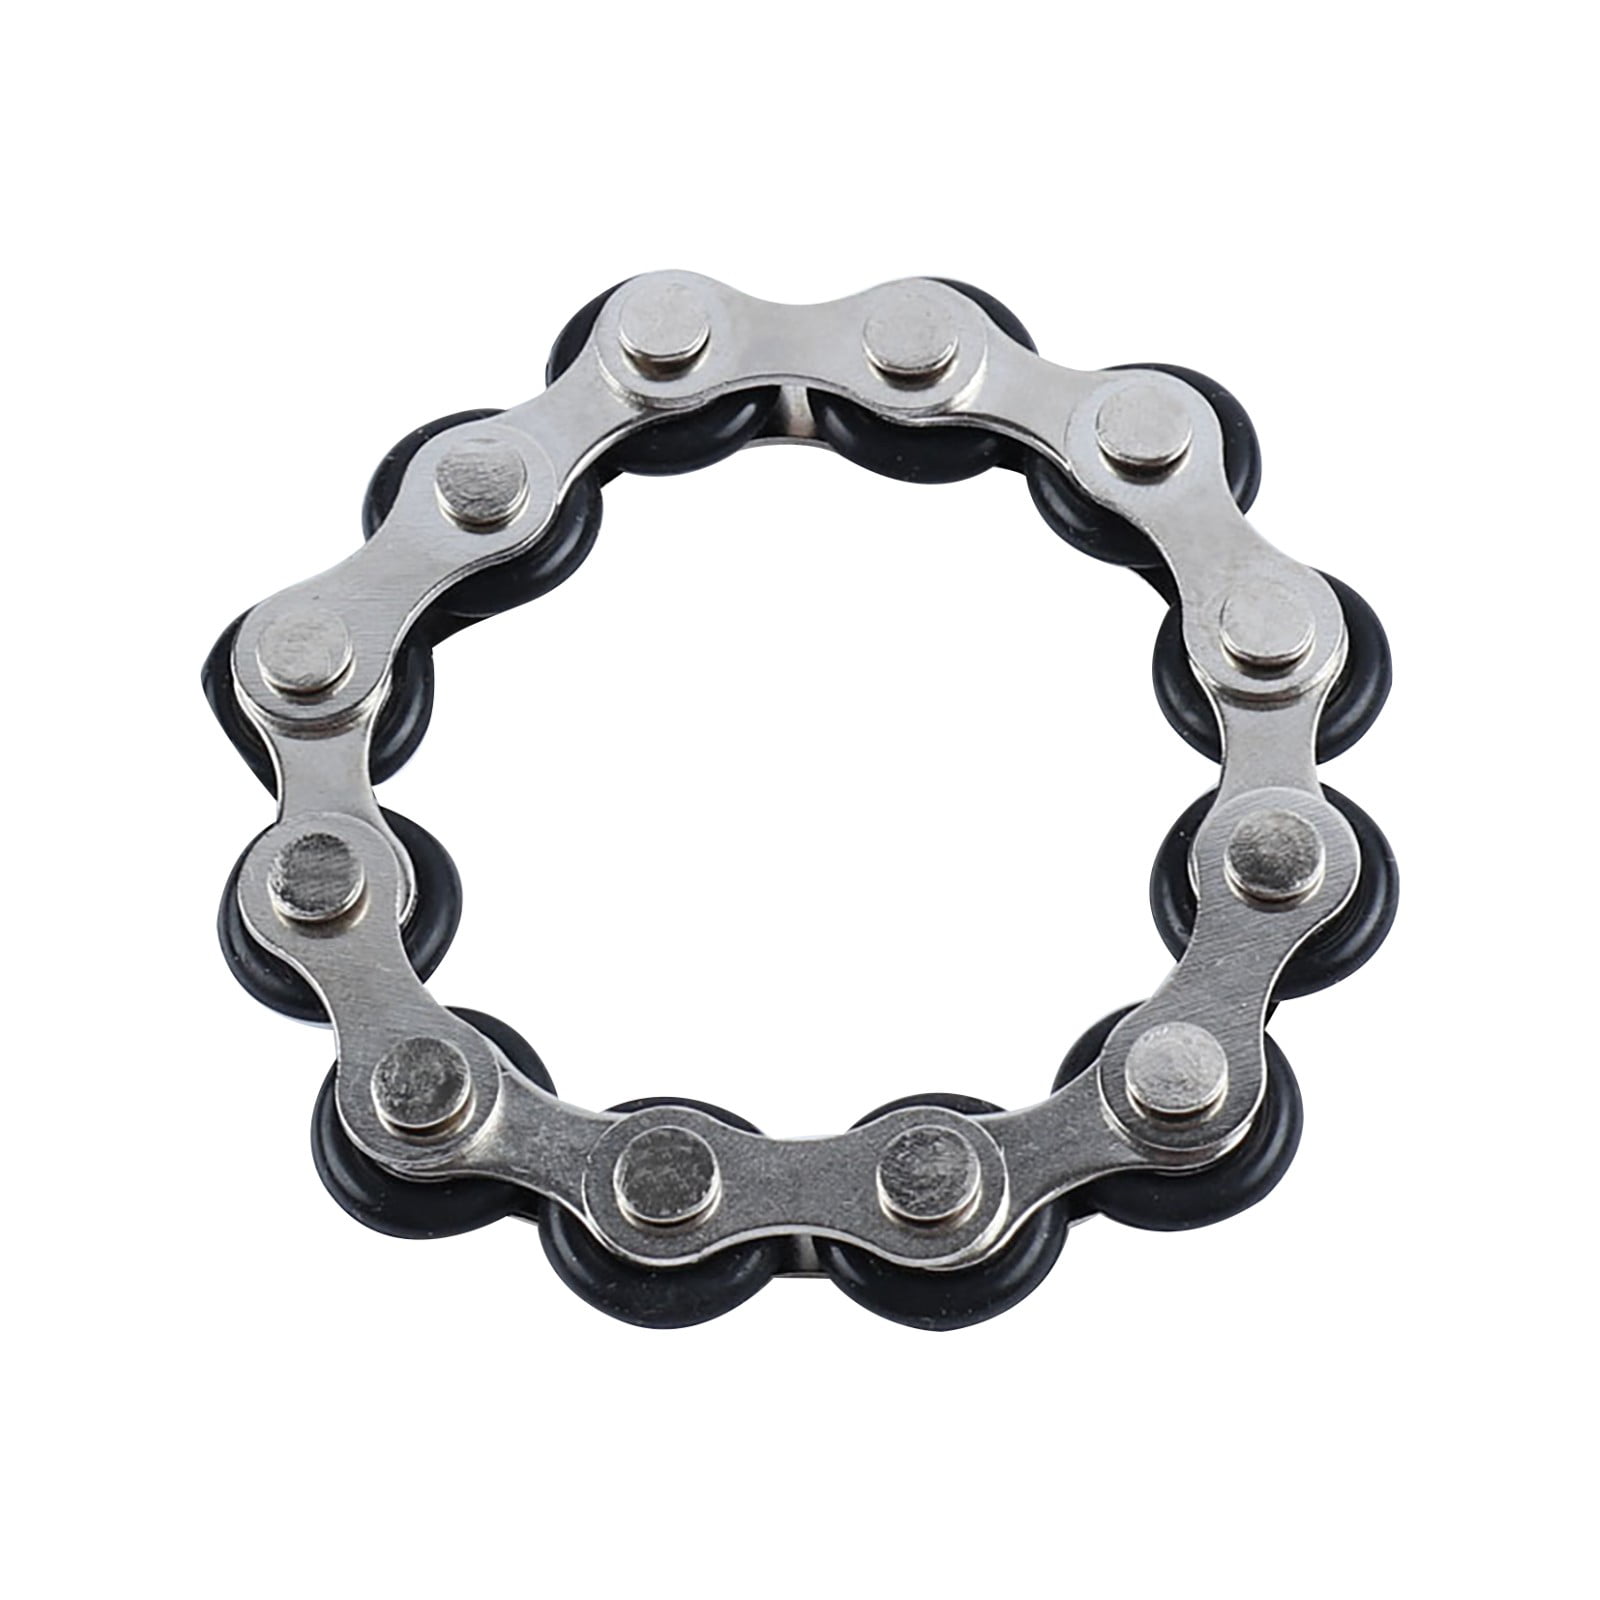 UK Roller Chain Fidget Toy Stress Reducer Perfect For ADD Anxiety Adults Kids 